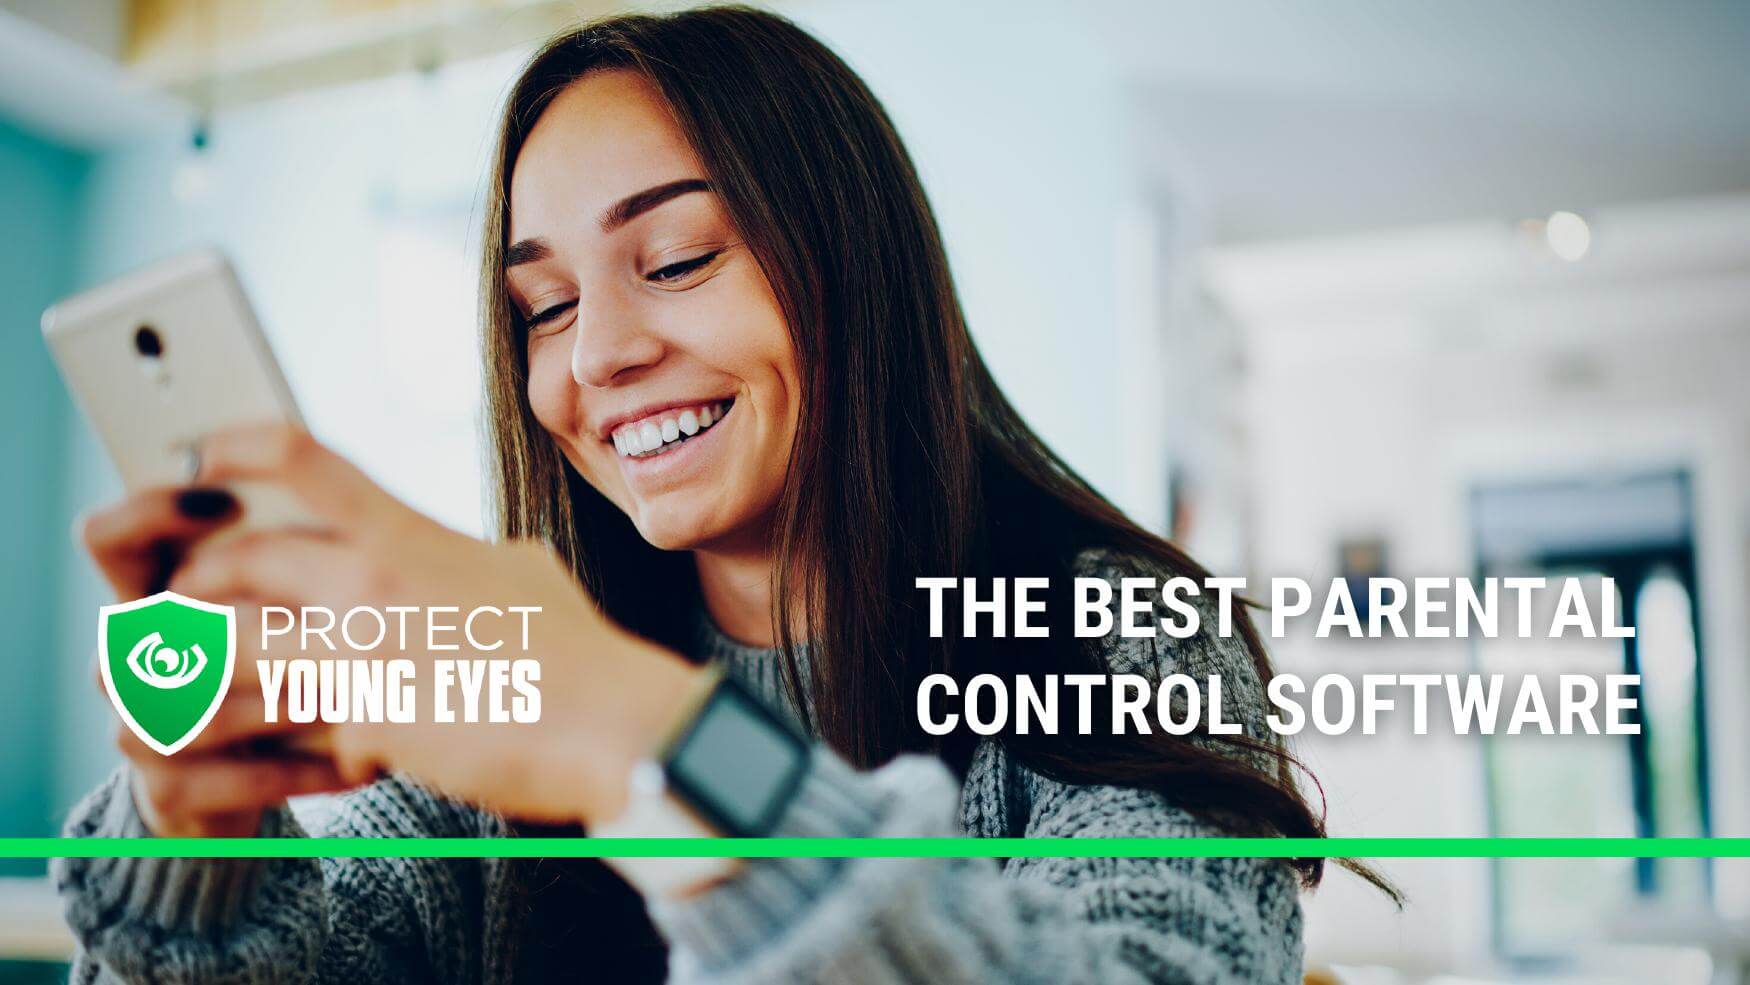 Mark Ashley Schoolgirl - The Best Parental Control Software - Protect Young Eyes